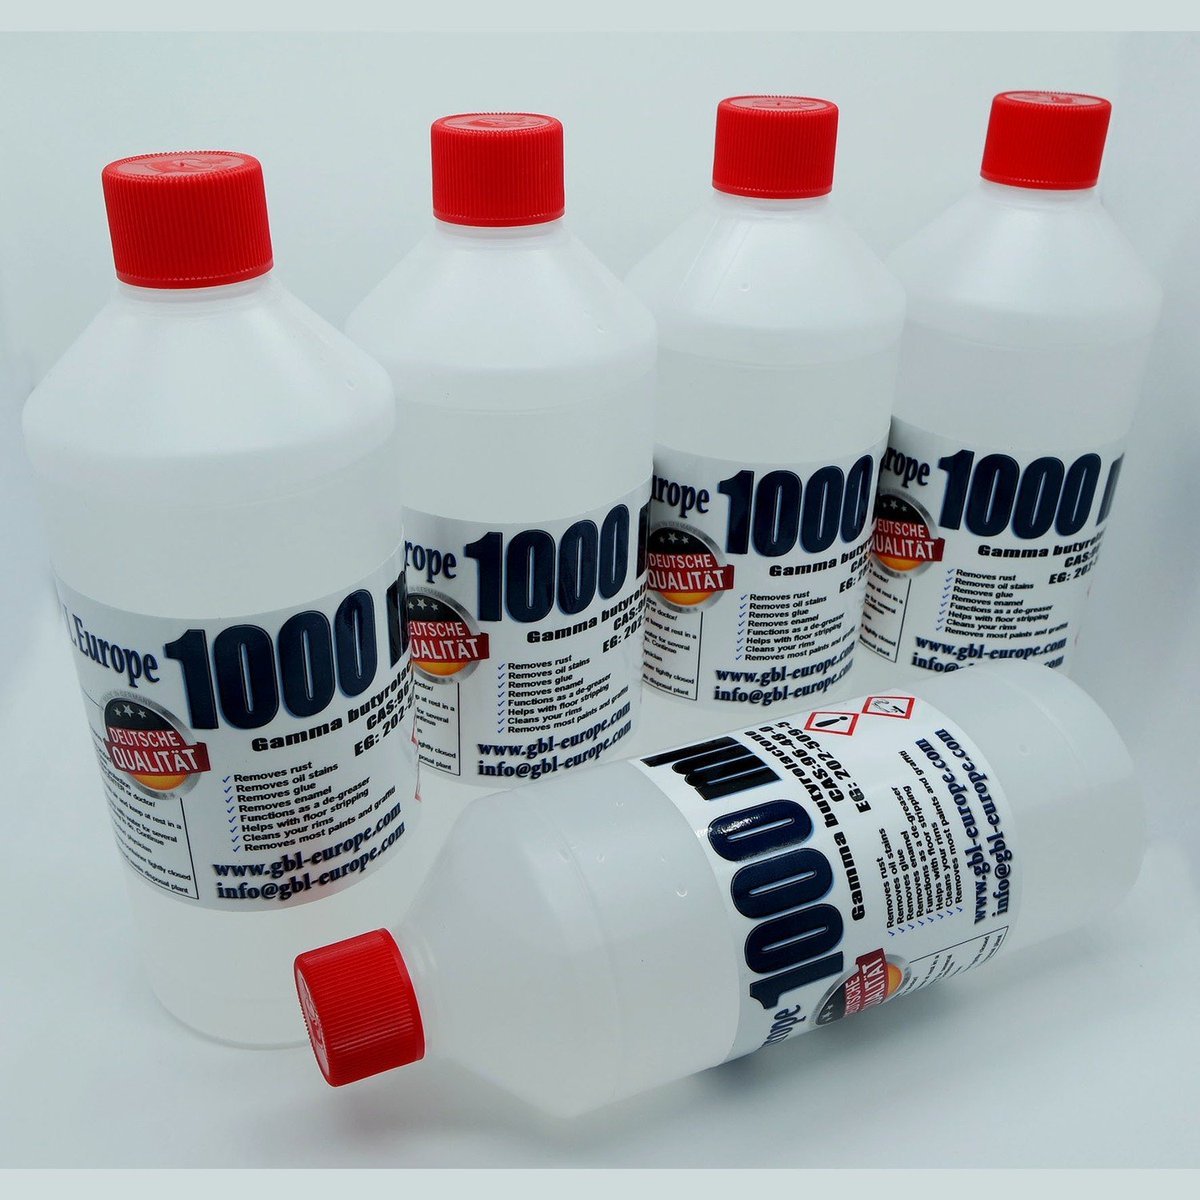 High-Quality Pure γ-Butyrolactone Solvent - GBL Cleaner for Superior  Cleaning and Industrial Uses